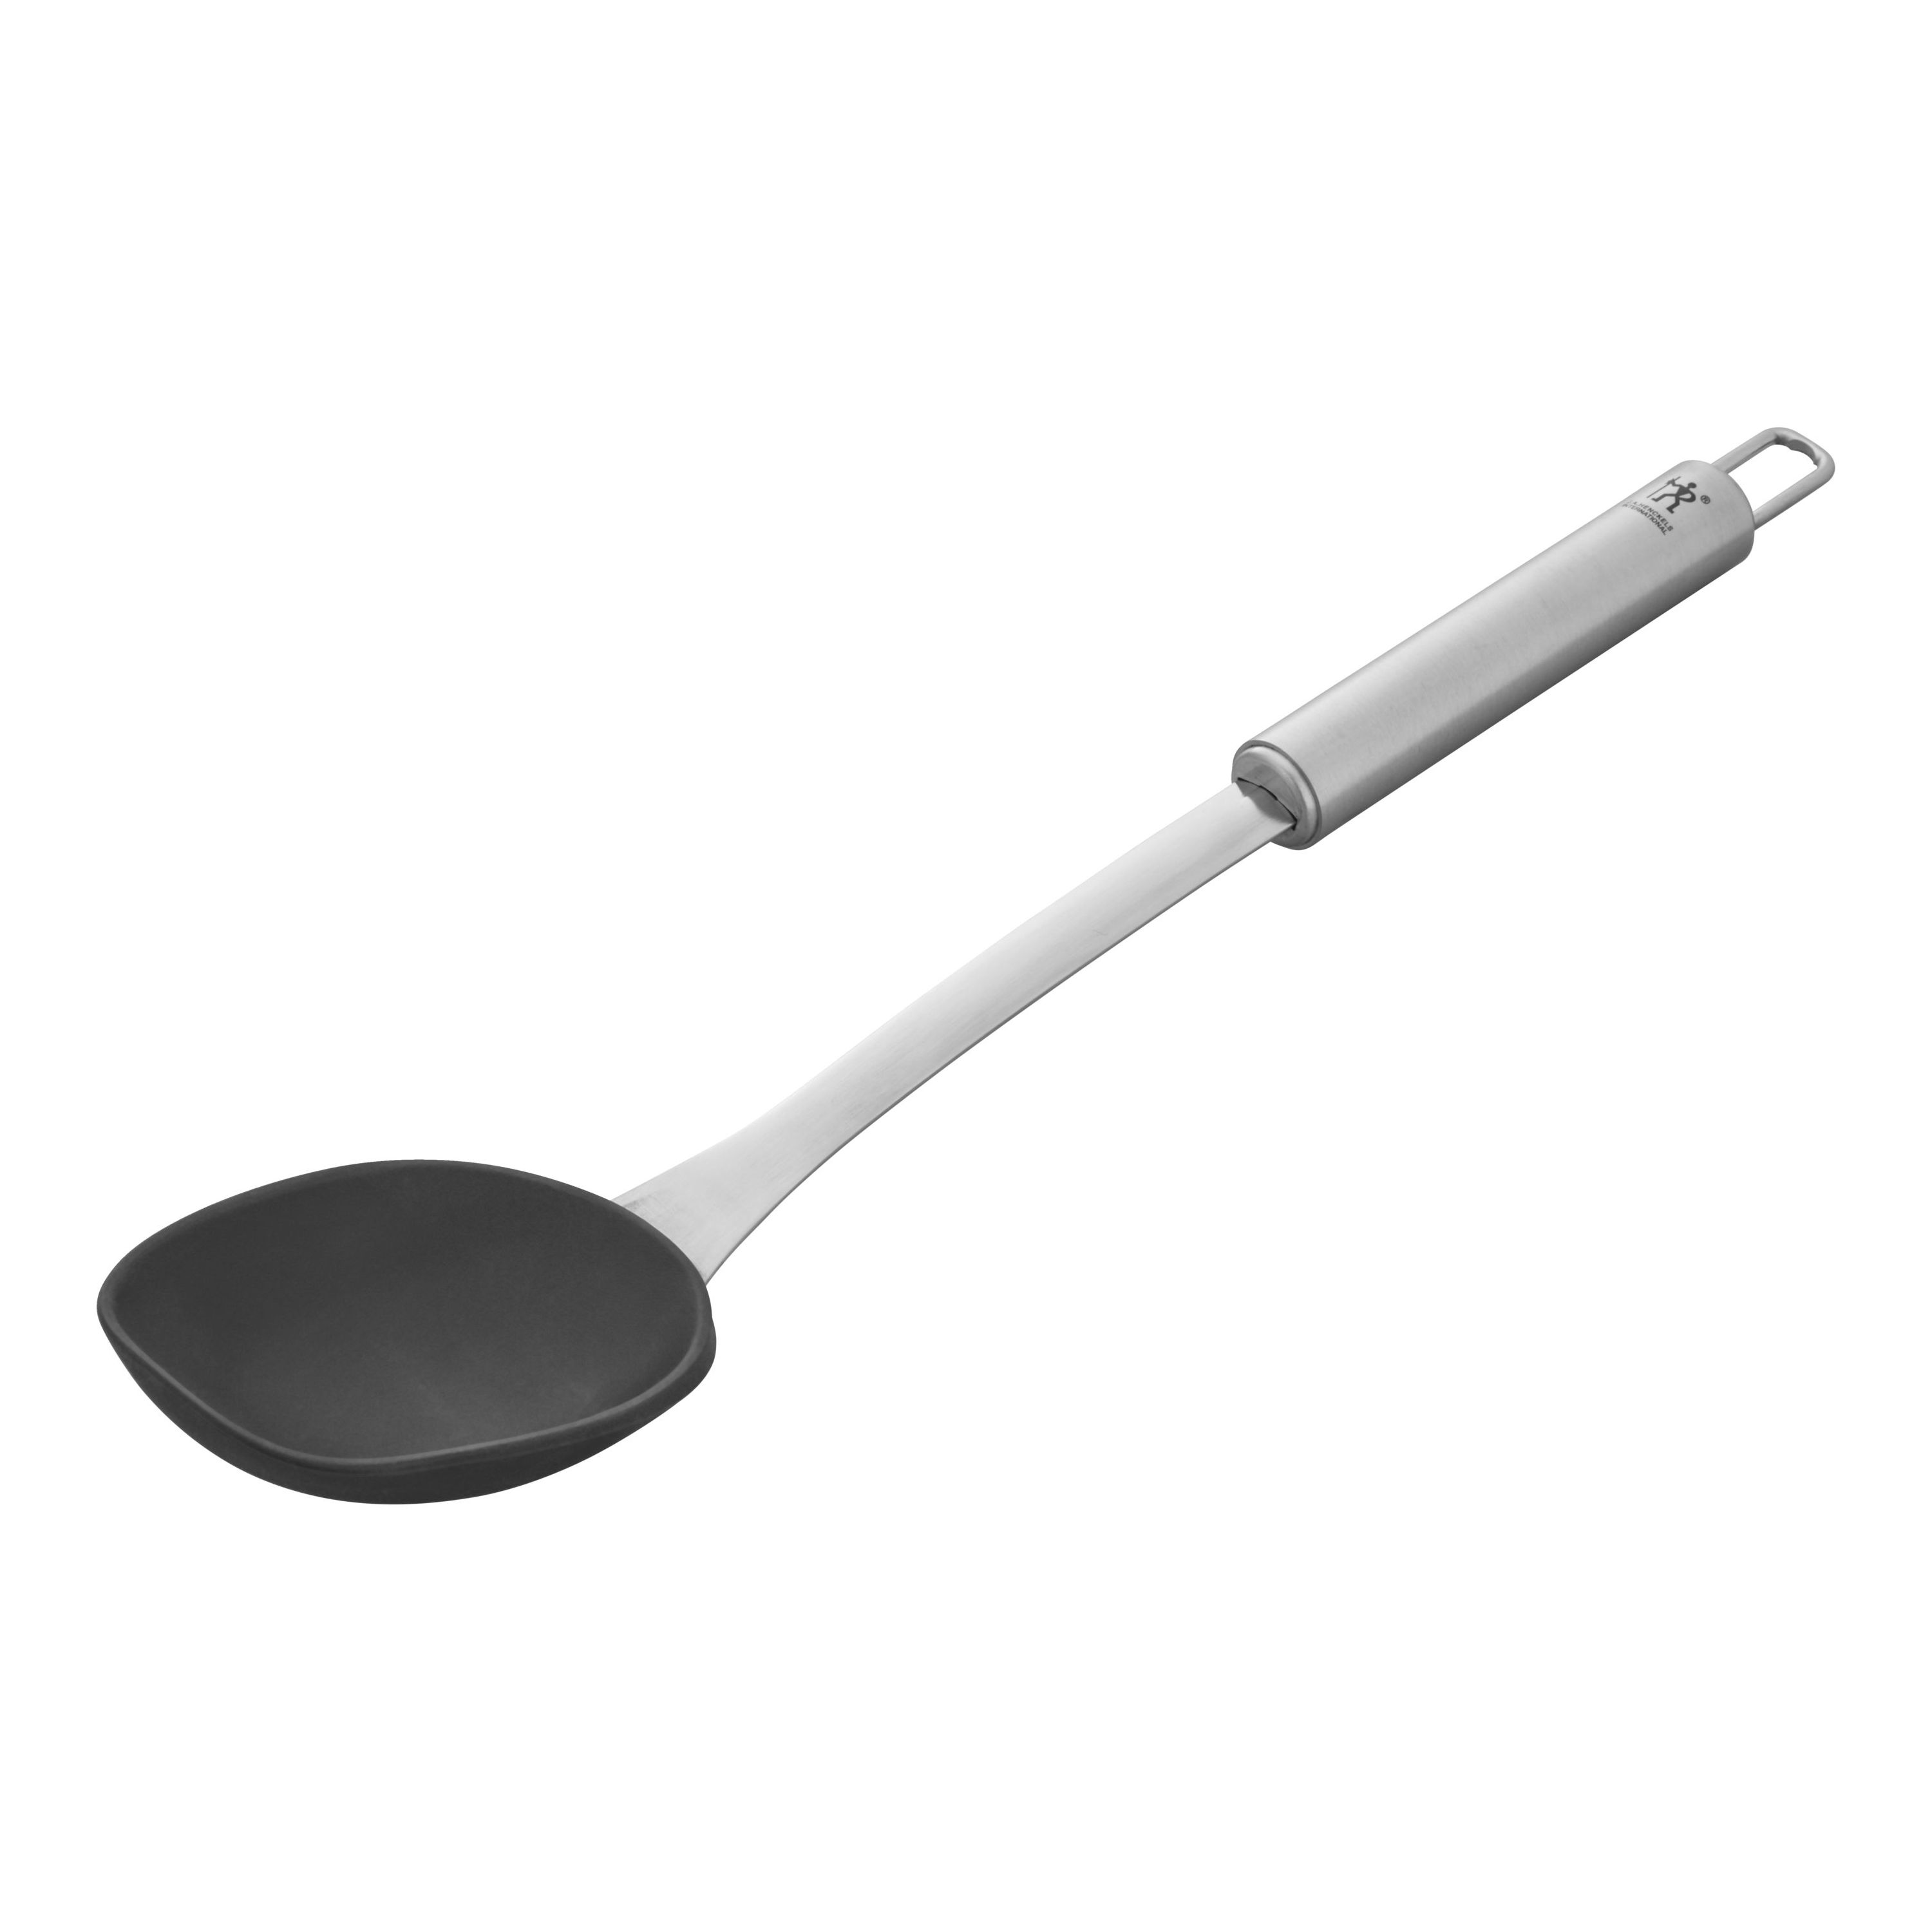 https://www.zwilling.com/on/demandware.static/-/Sites-zwilling-master-catalog/default/dw8dc769aa/images/large/12909-000_2.jpg